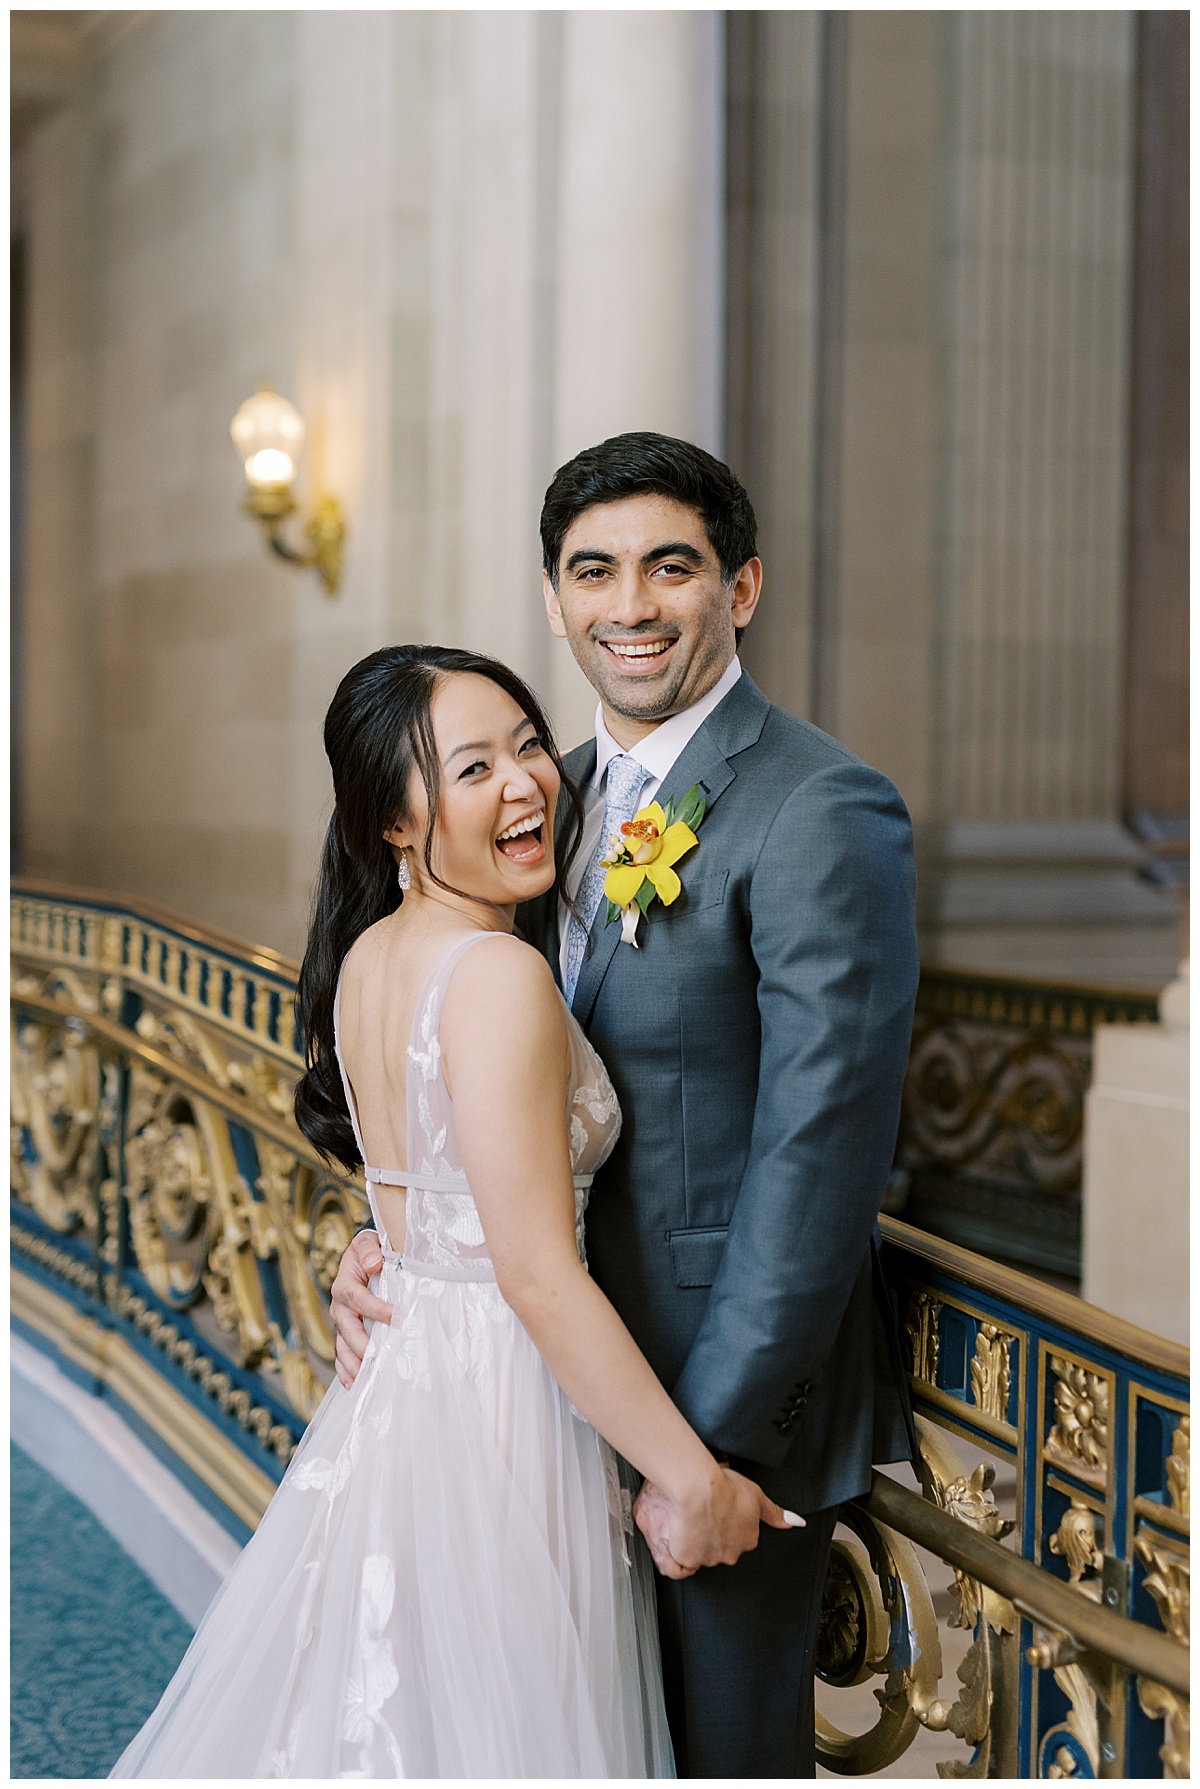 Mary and Ashir laughing after their elopement ceremony